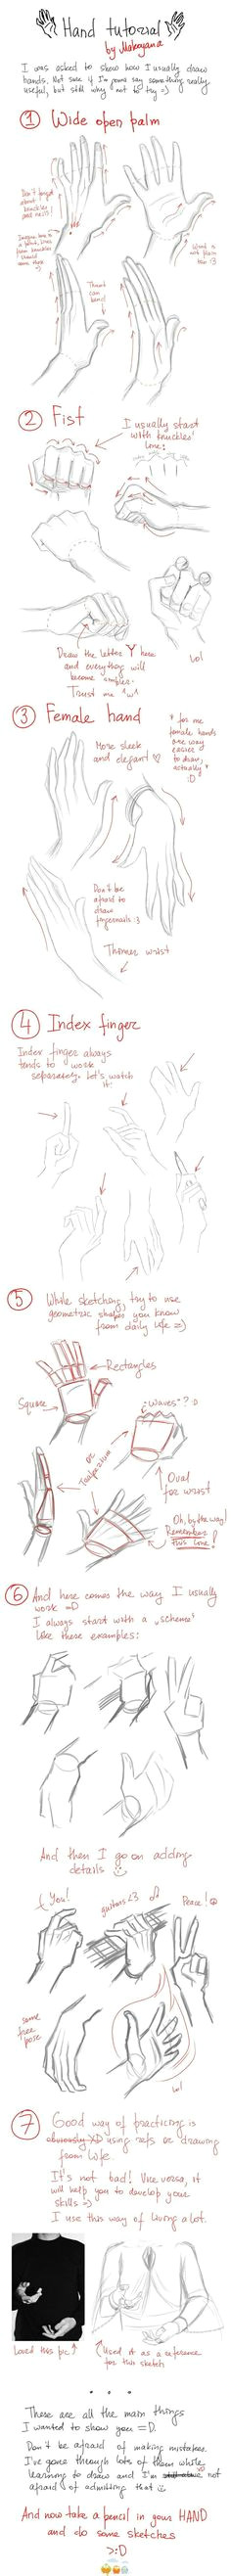 inspiring drawing lessons drawing tips drawing hands drawing stuff drawing pictures